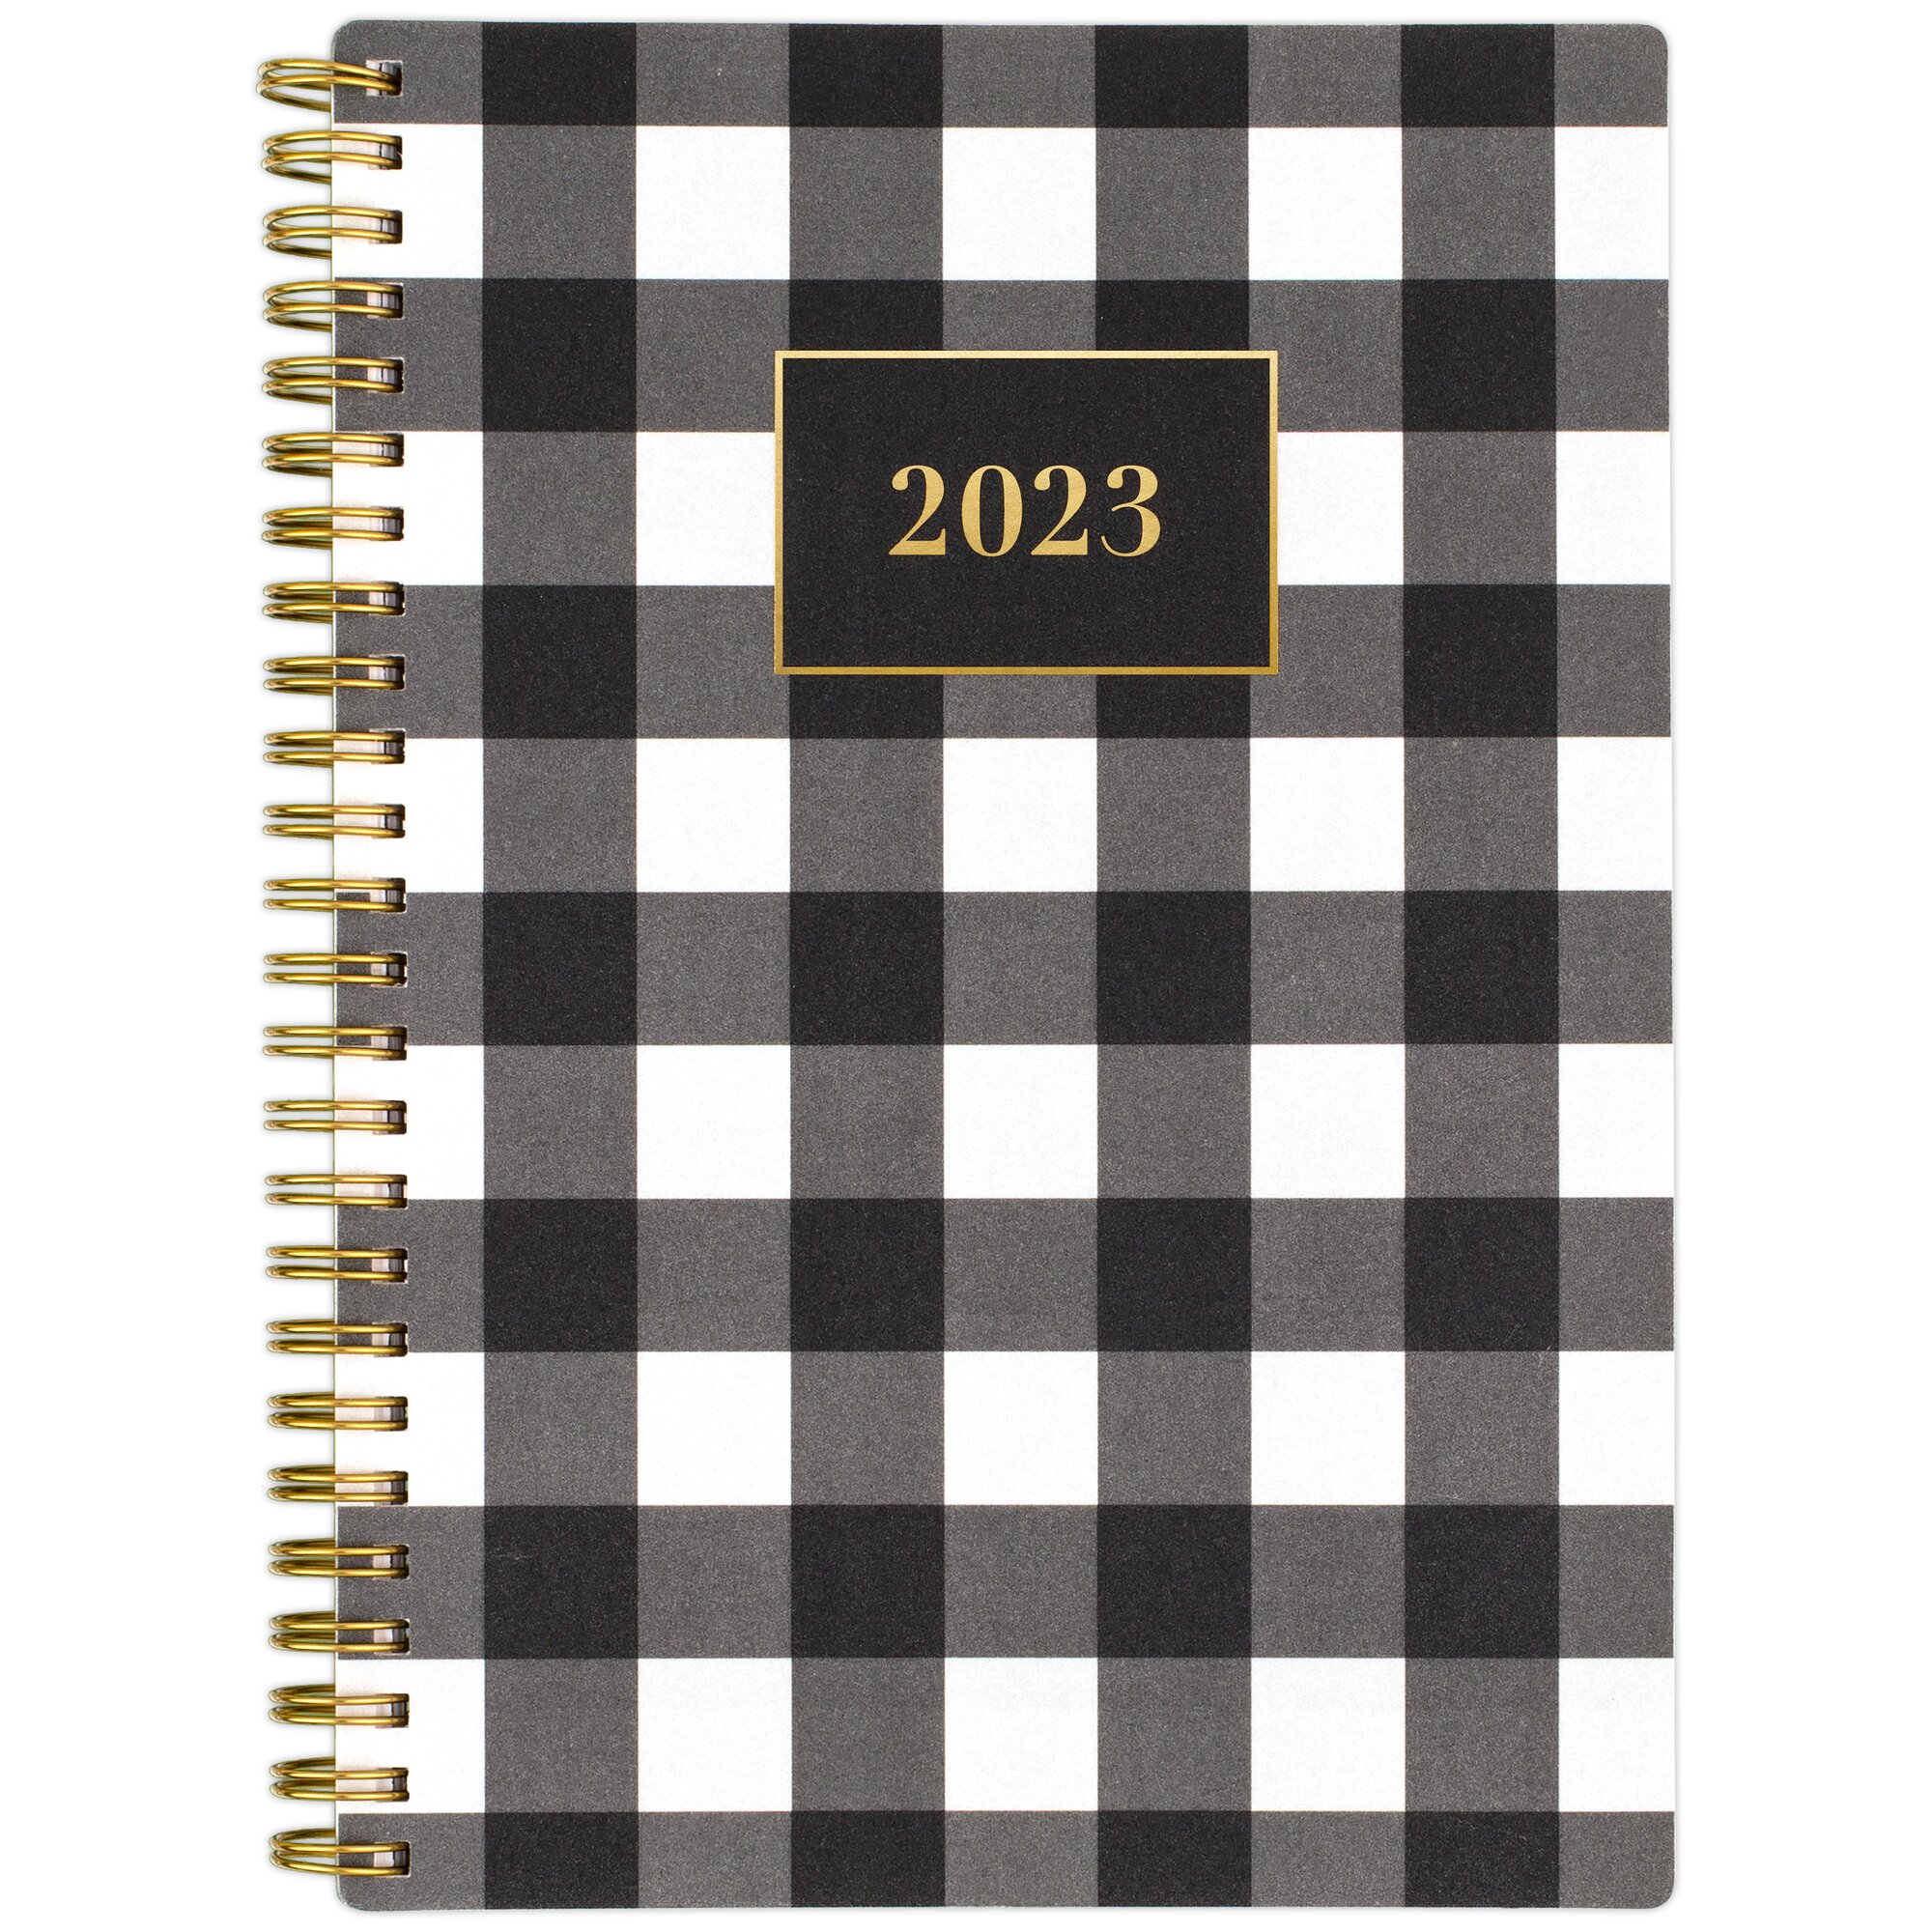 CAMBRIDGE ABIGAIL 2023 Weekly Monthly Planner Small 5 12 x 8 12